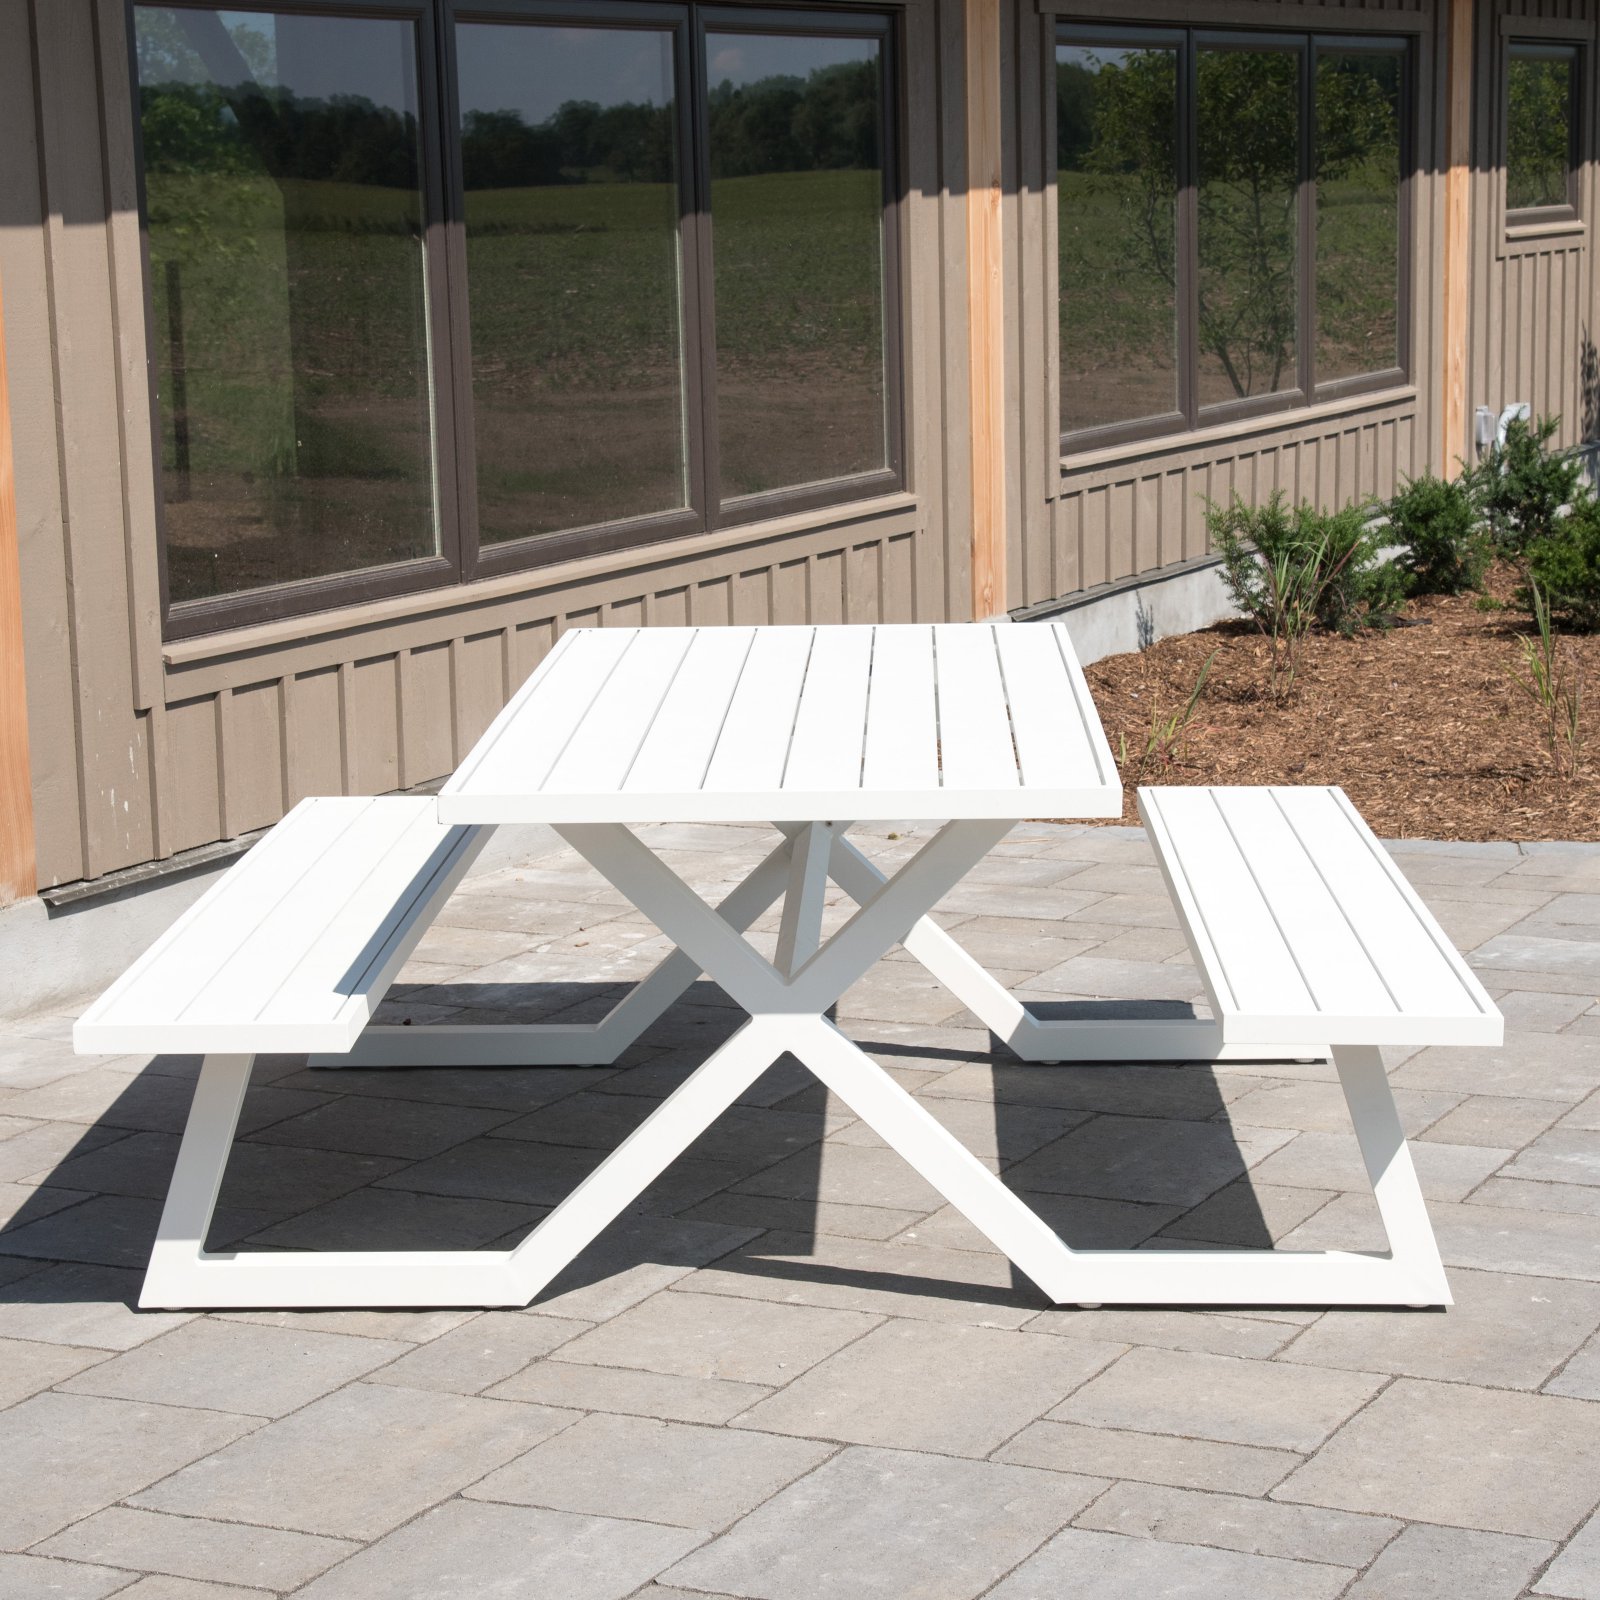 Vivere Banquet Deluxe Picnic Table - image 3 of 4